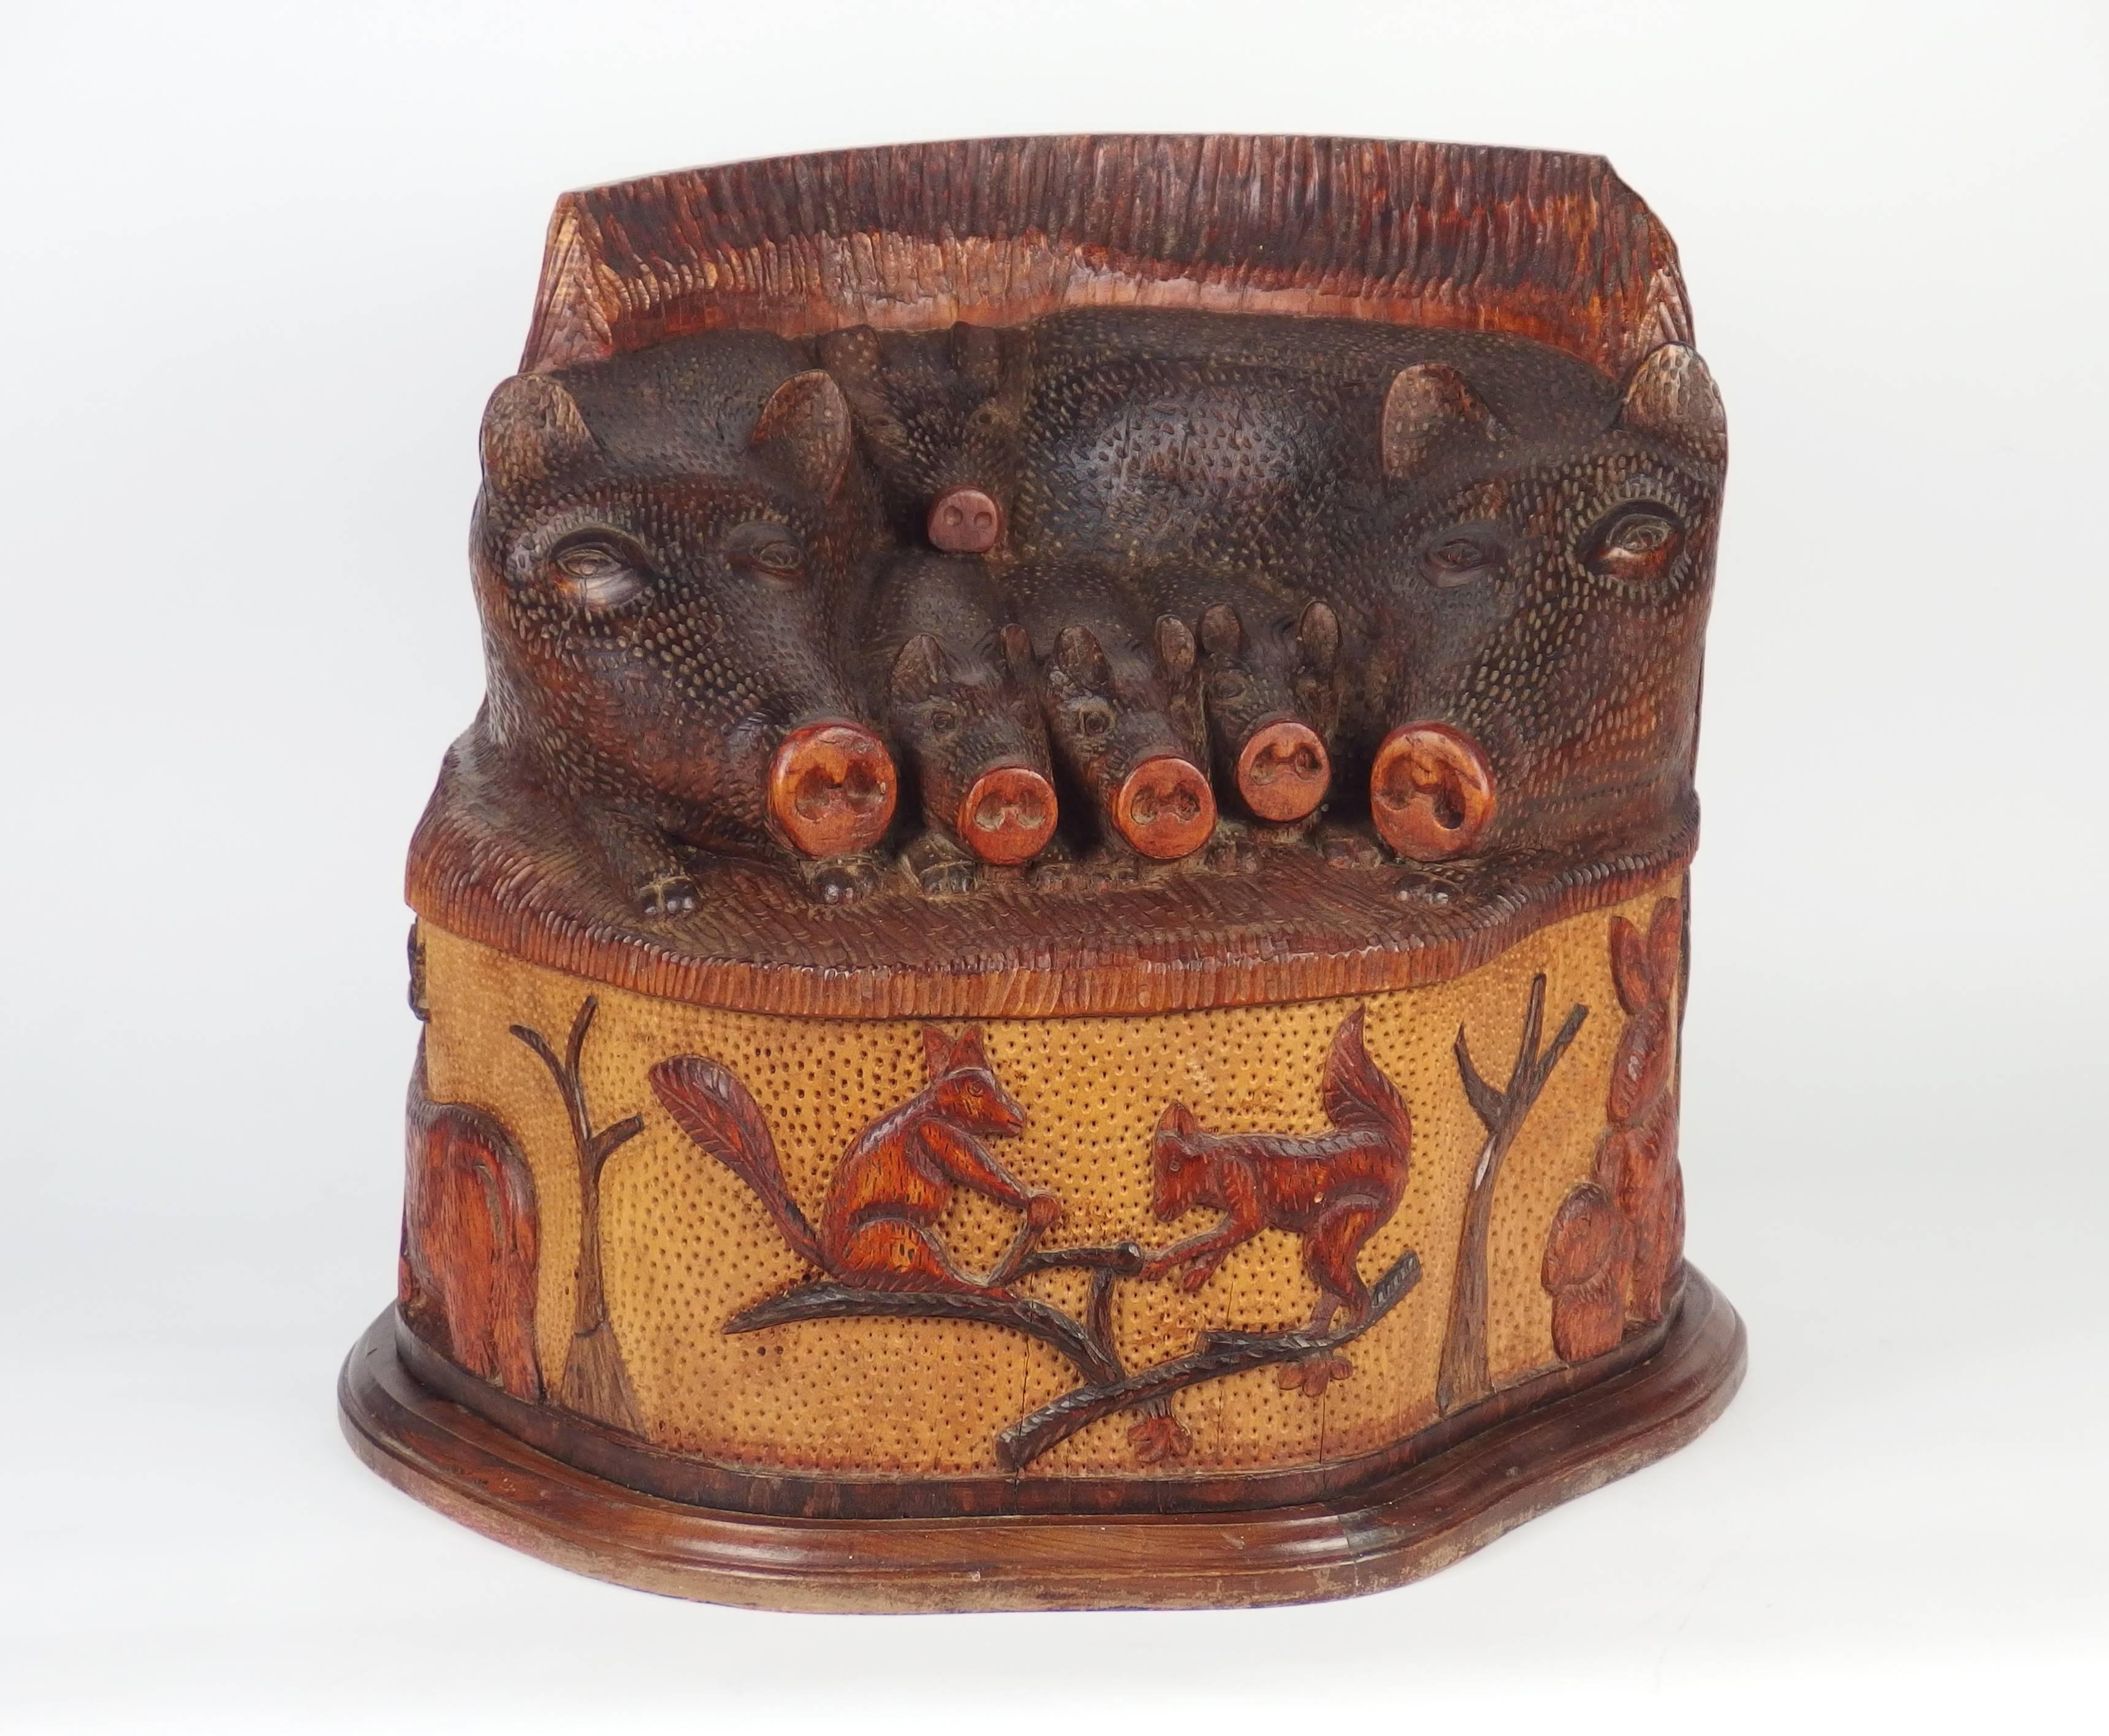 Folk Art stool with a "boar" family sculpted on the seat and a base decorated with squirrels, trees, rabbits and stag. Carved and stained wood.